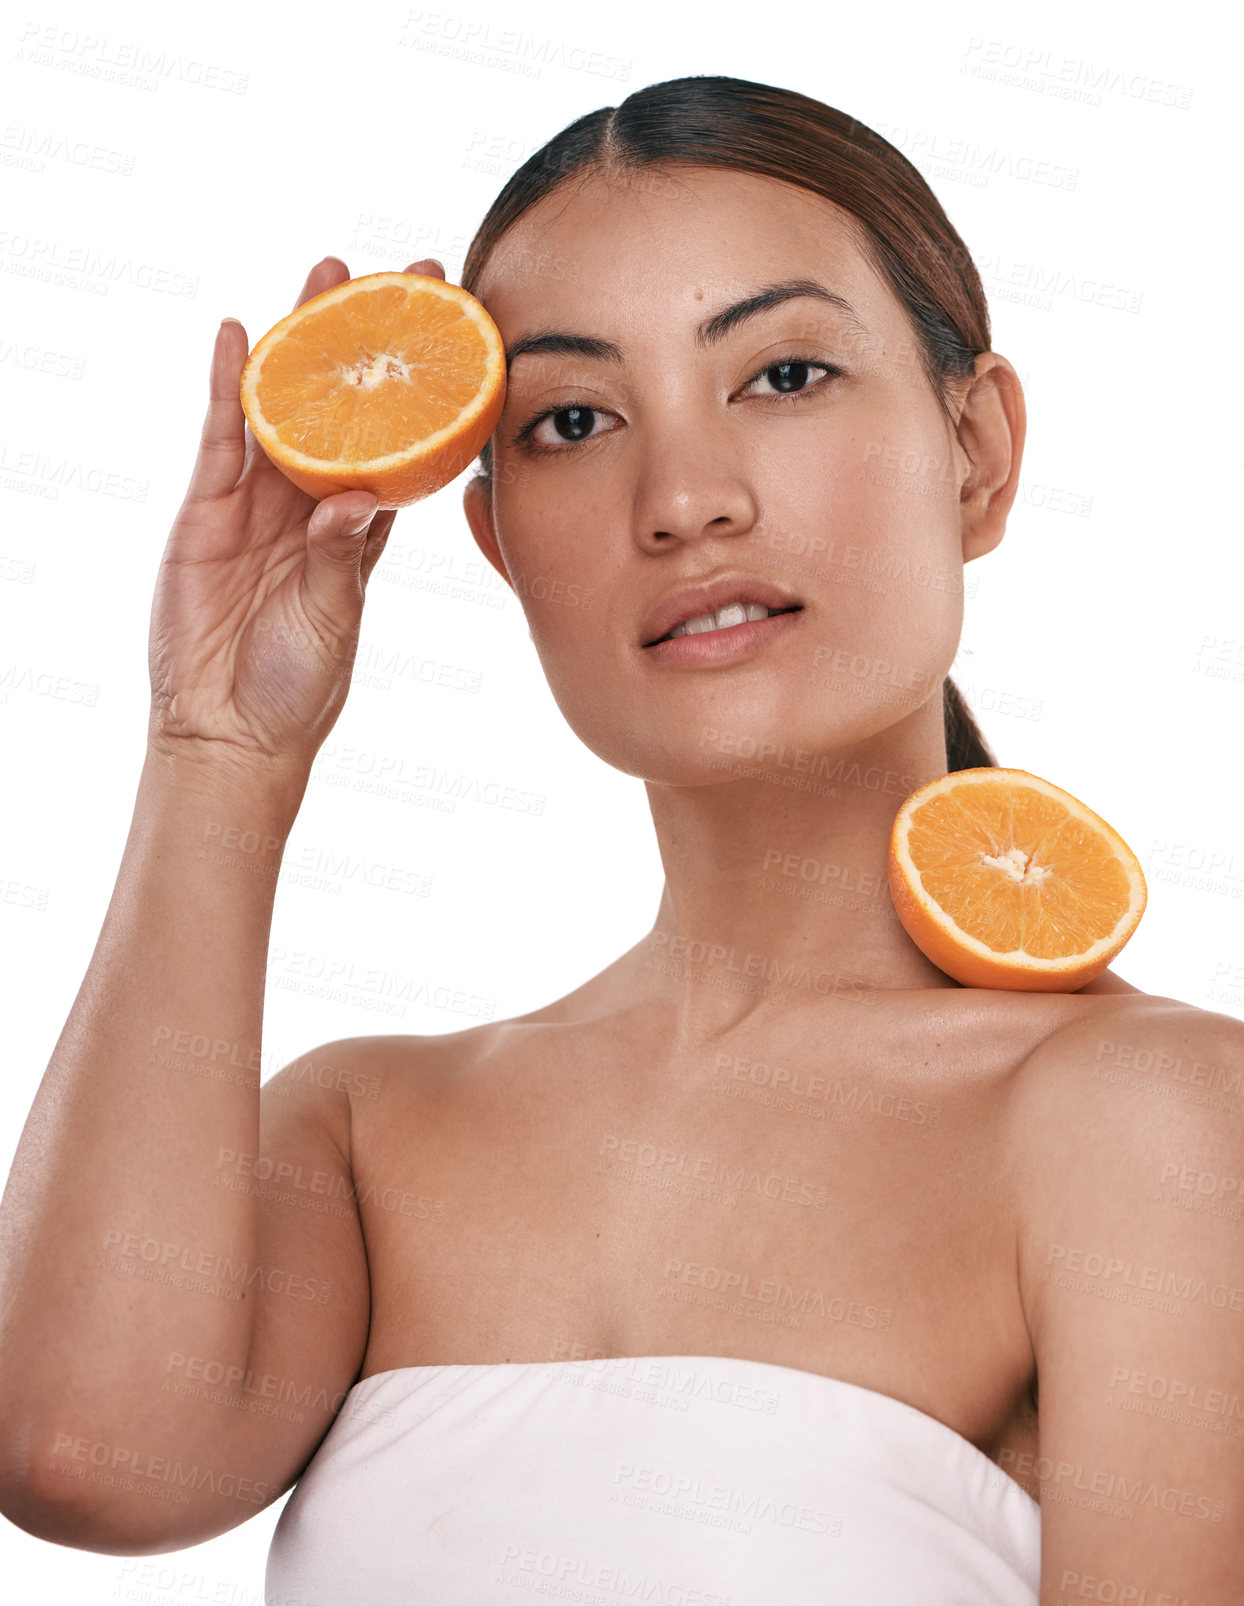 Buy stock photo Shot of a beautiful young woman posing with halved oranges against her skin